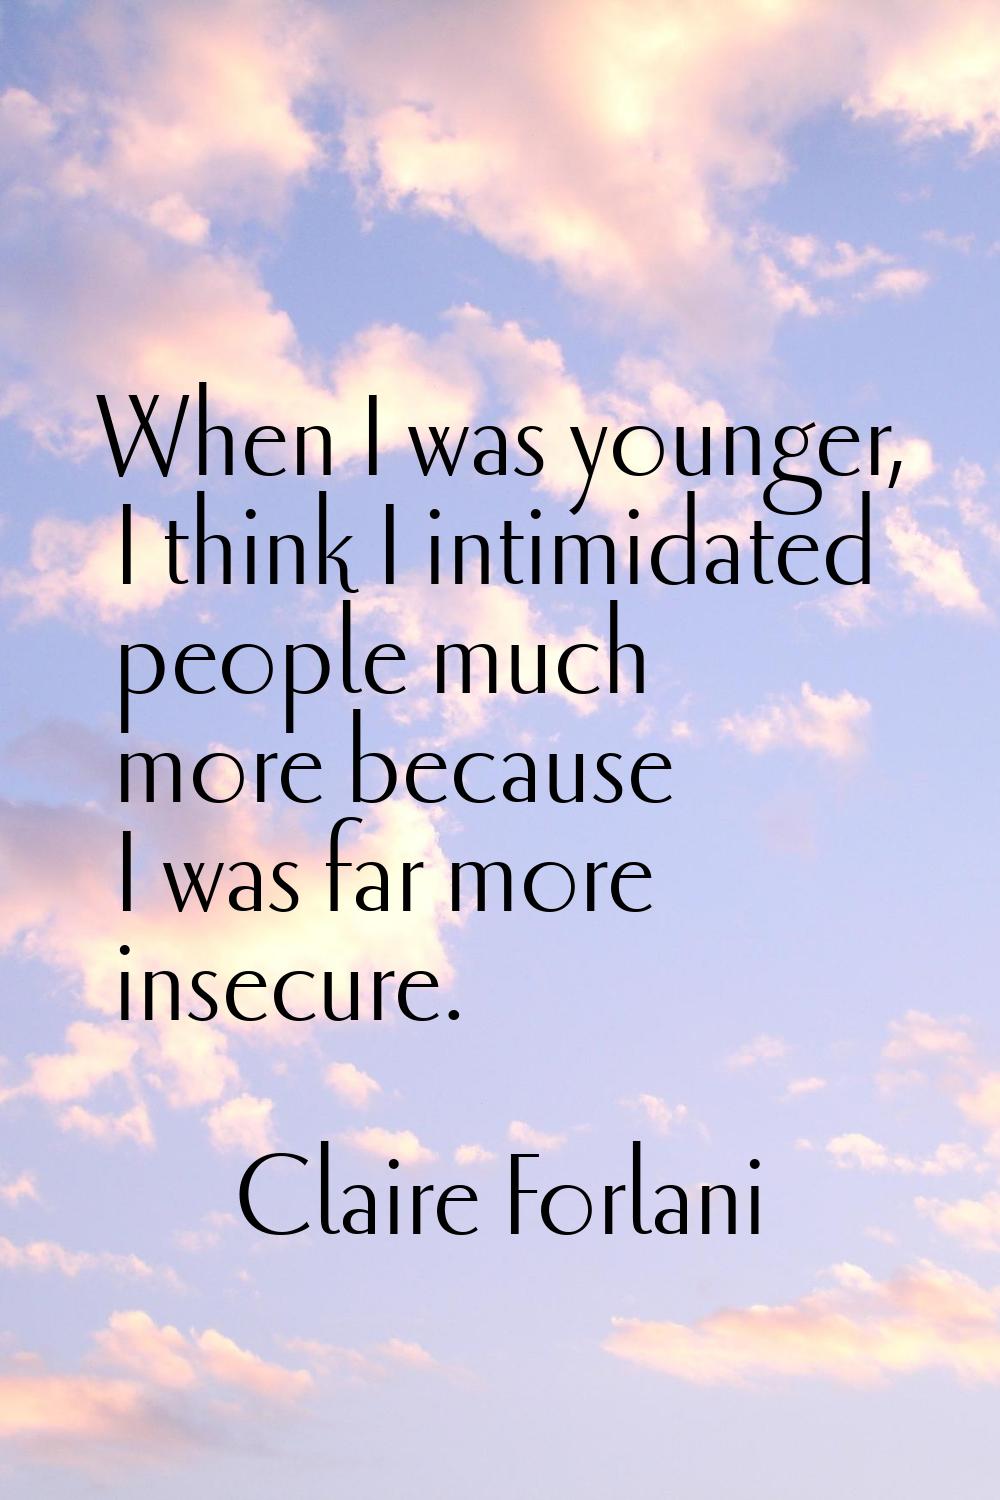 When I was younger, I think I intimidated people much more because I was far more insecure.